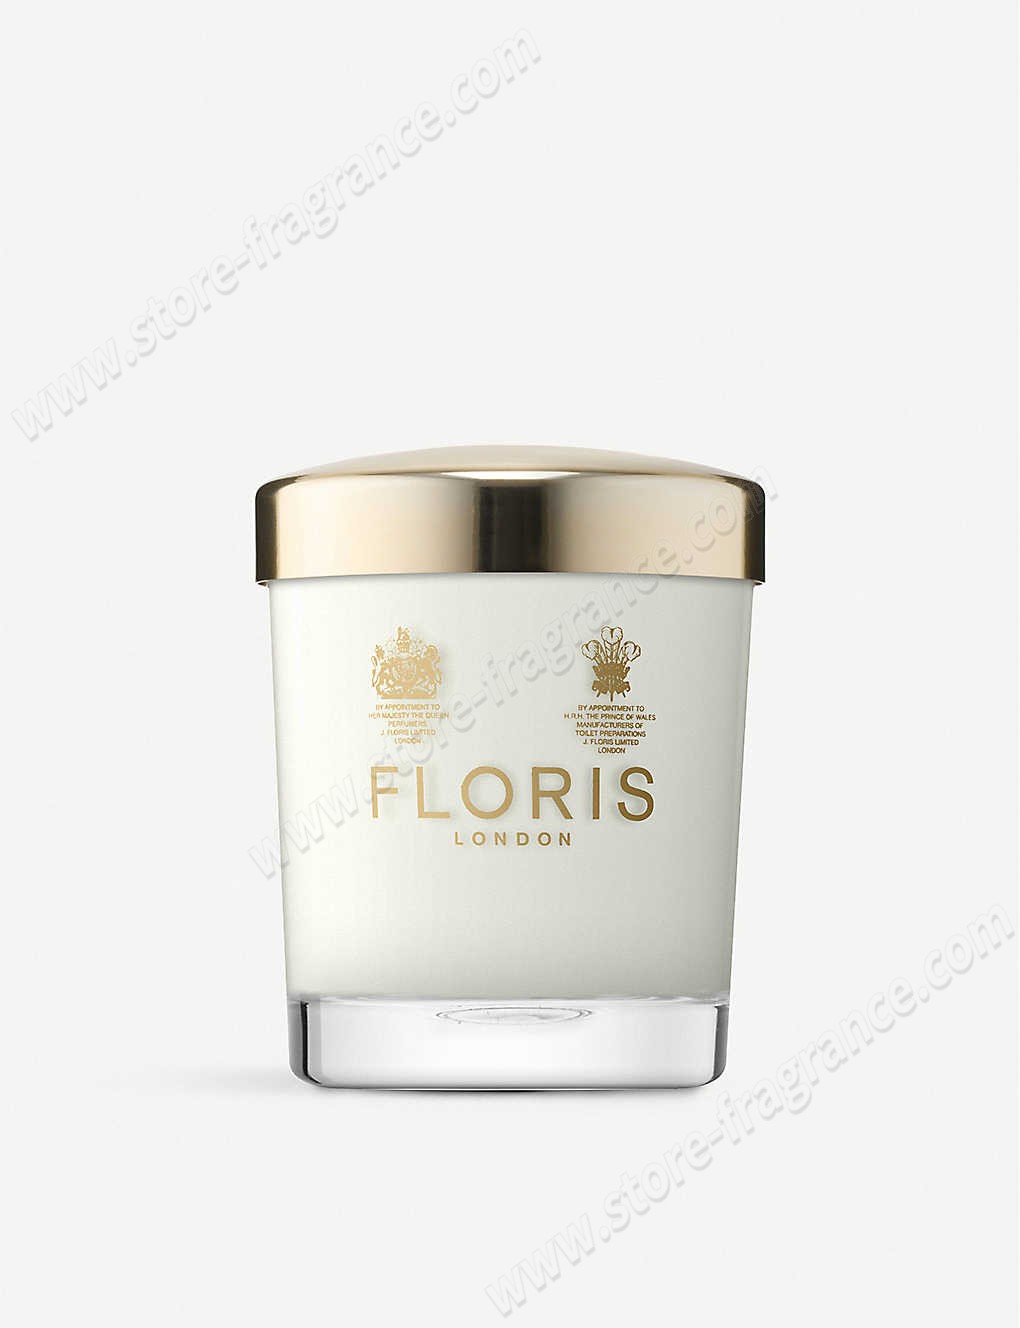 FLORIS/Grapefruit & rosemary scented candle 175g ✿ Discount Store - FLORIS/Grapefruit & rosemary scented candle 175g ✿ Discount Store